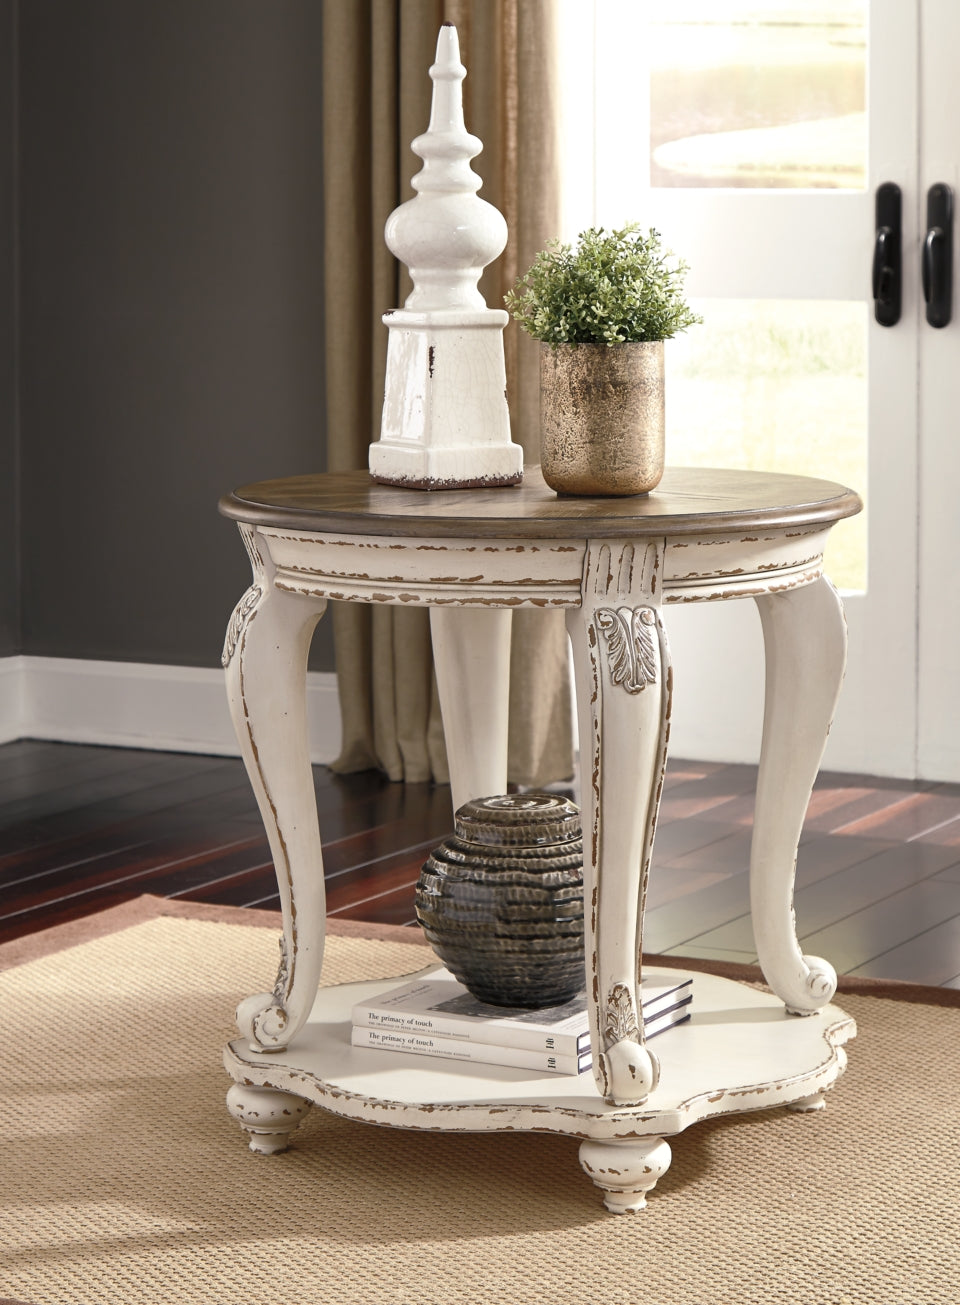 Realyn 2 End Tables - PKG008493 - furniture place usa